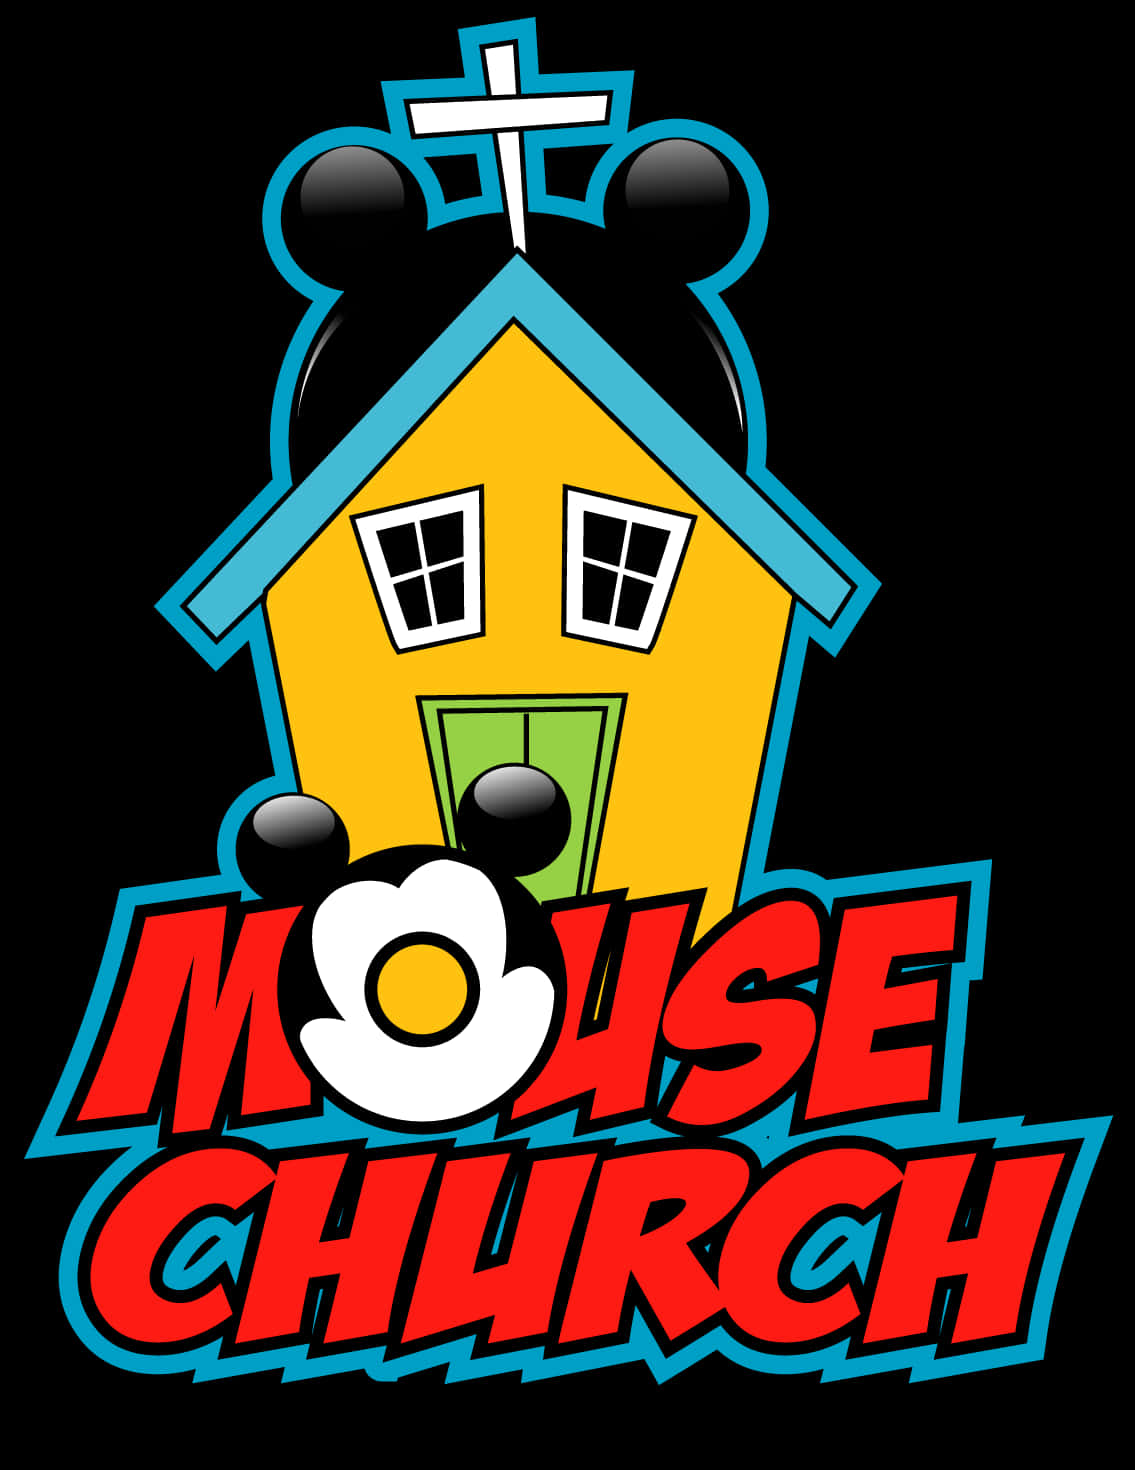 Mouse Church Graphic Illustration PNG image